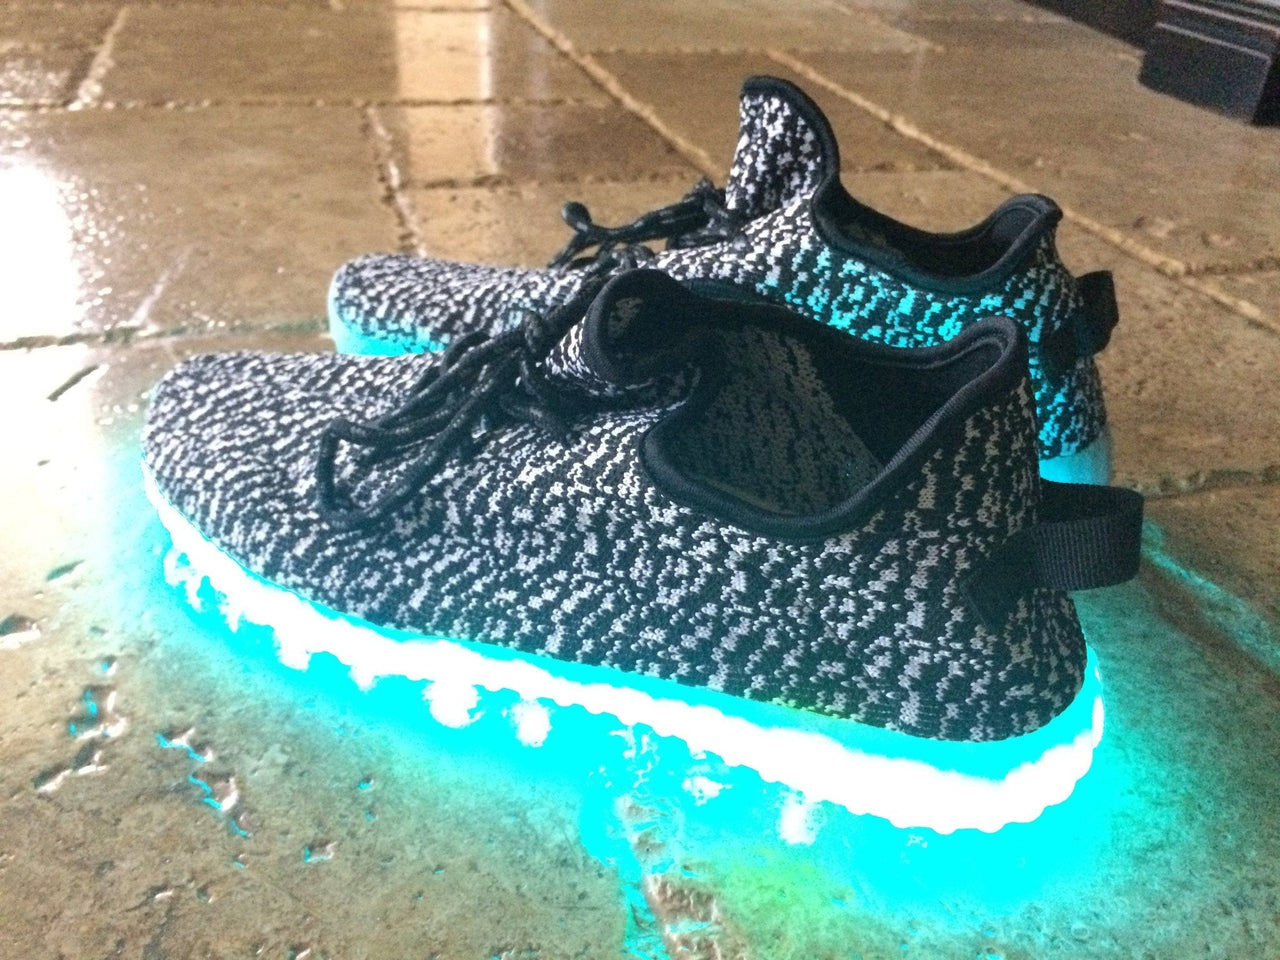 Light Up Yeezy-Inspired Shoes